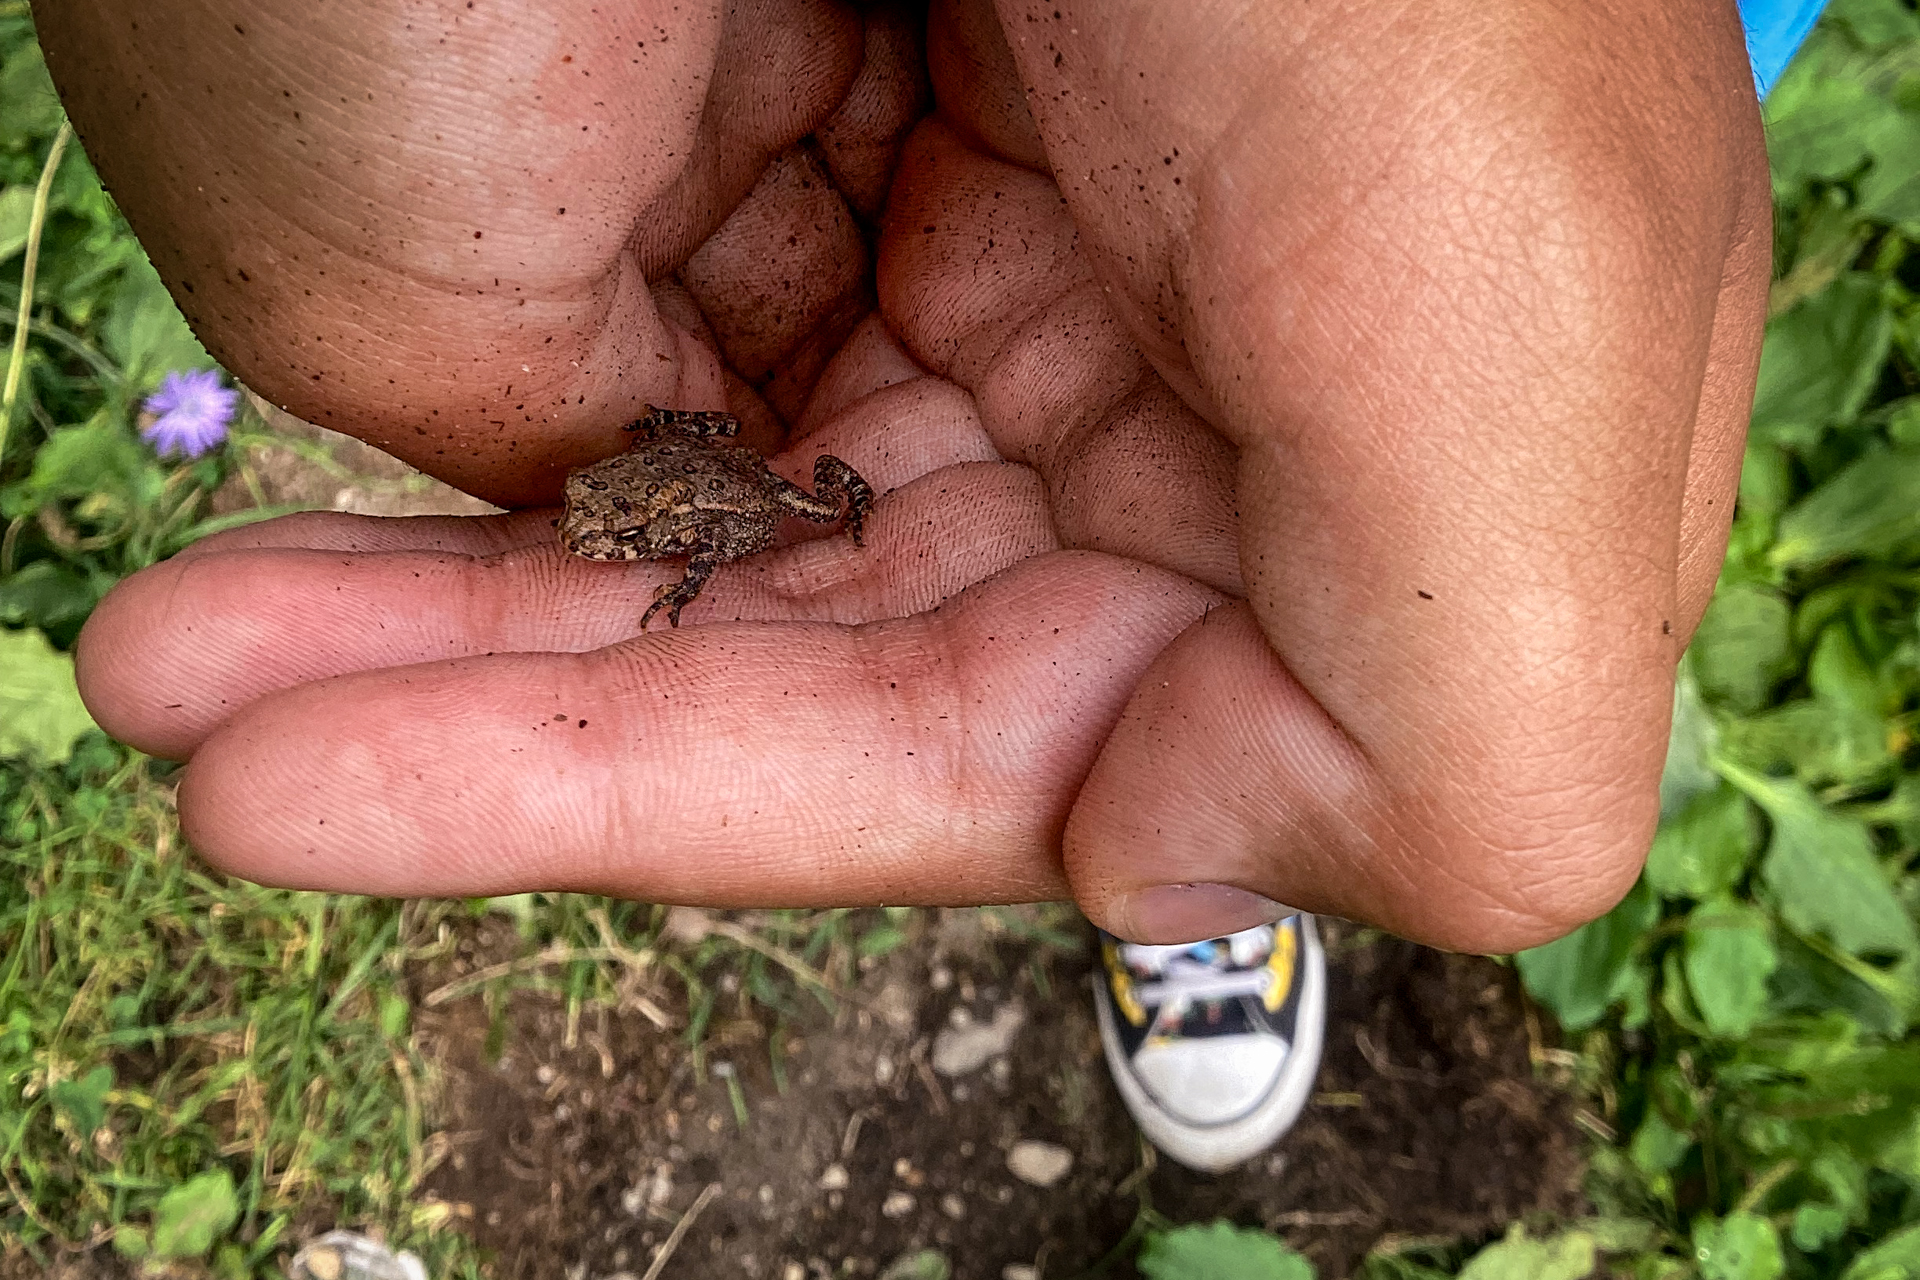 A close-up photo of a pair of hands holding a tiny frog